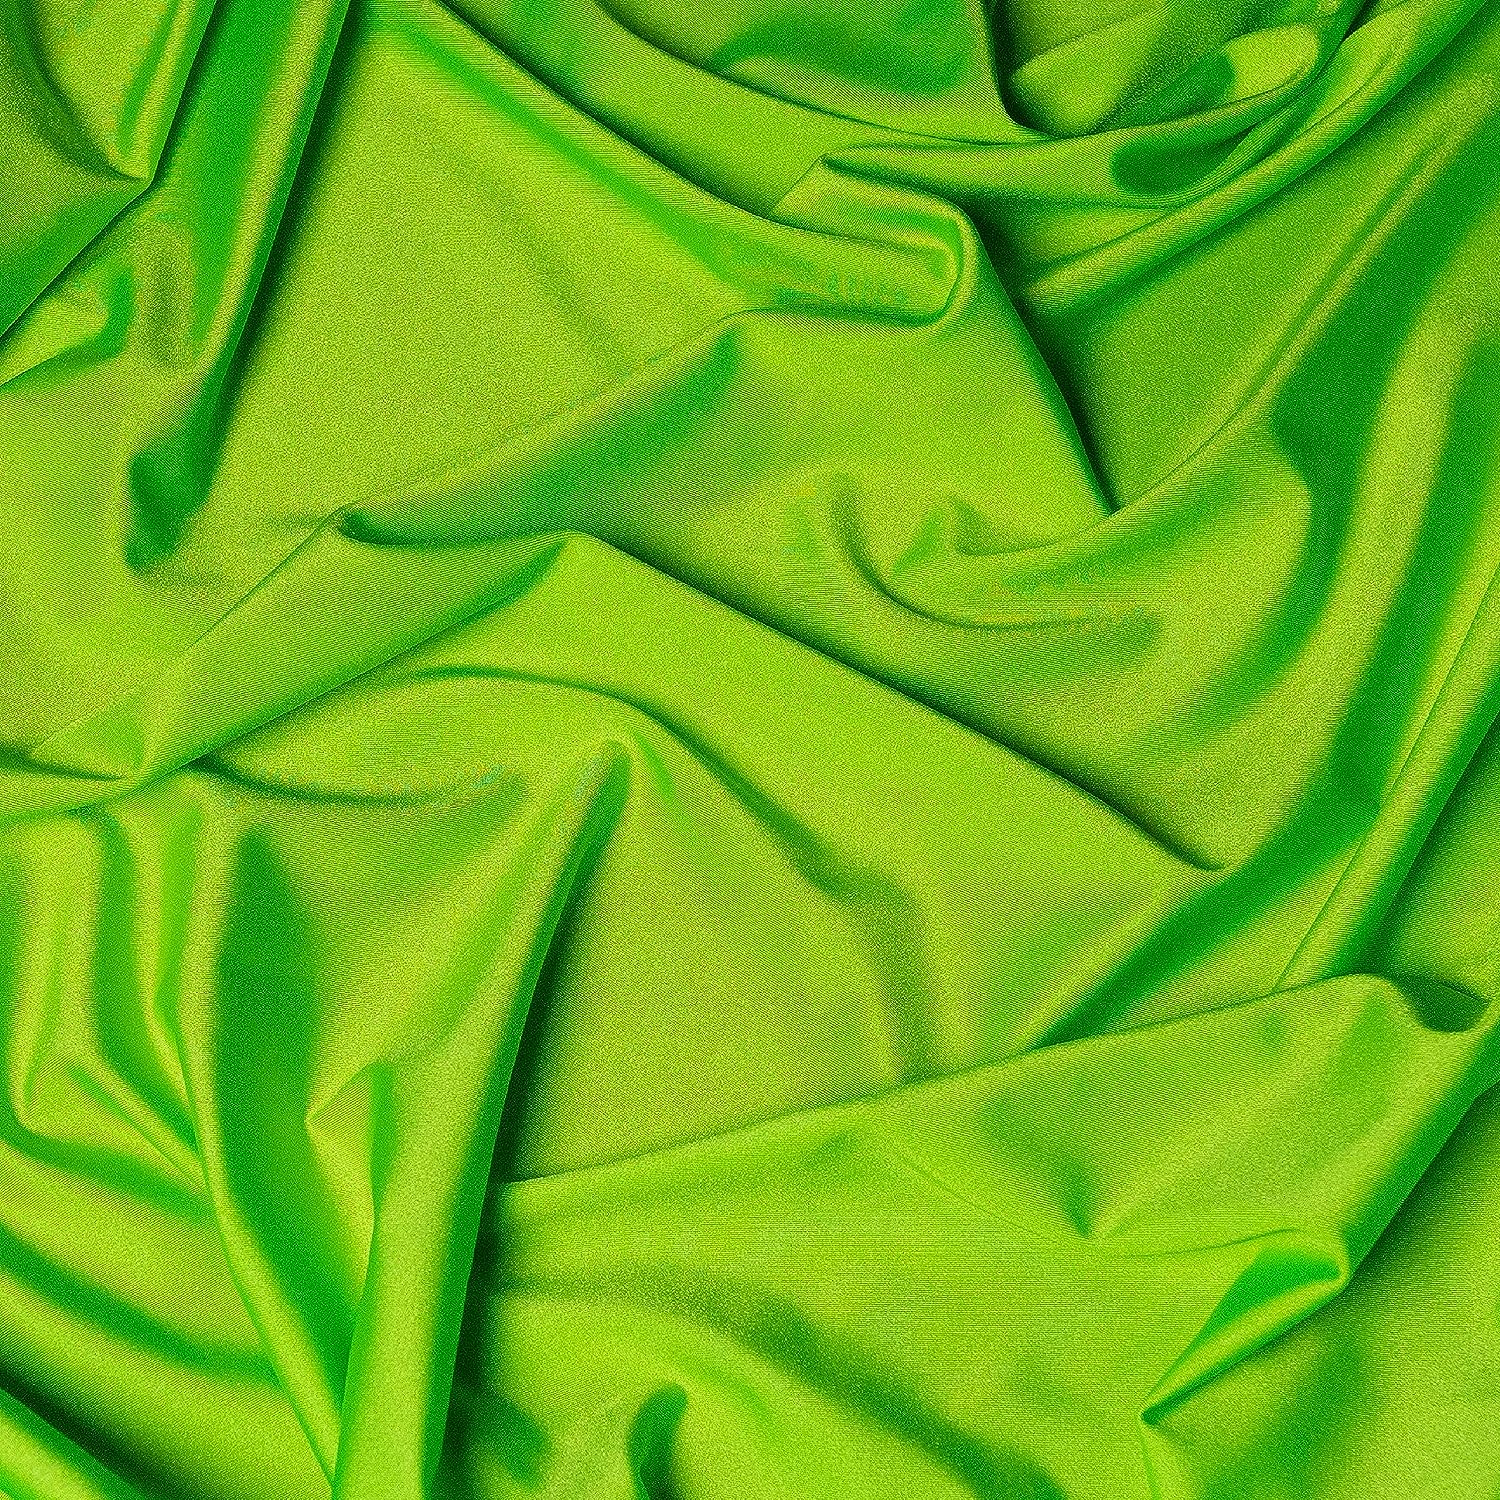 Tempest Neon Green Athletic Mesh Fabric. 4 Way Stretch